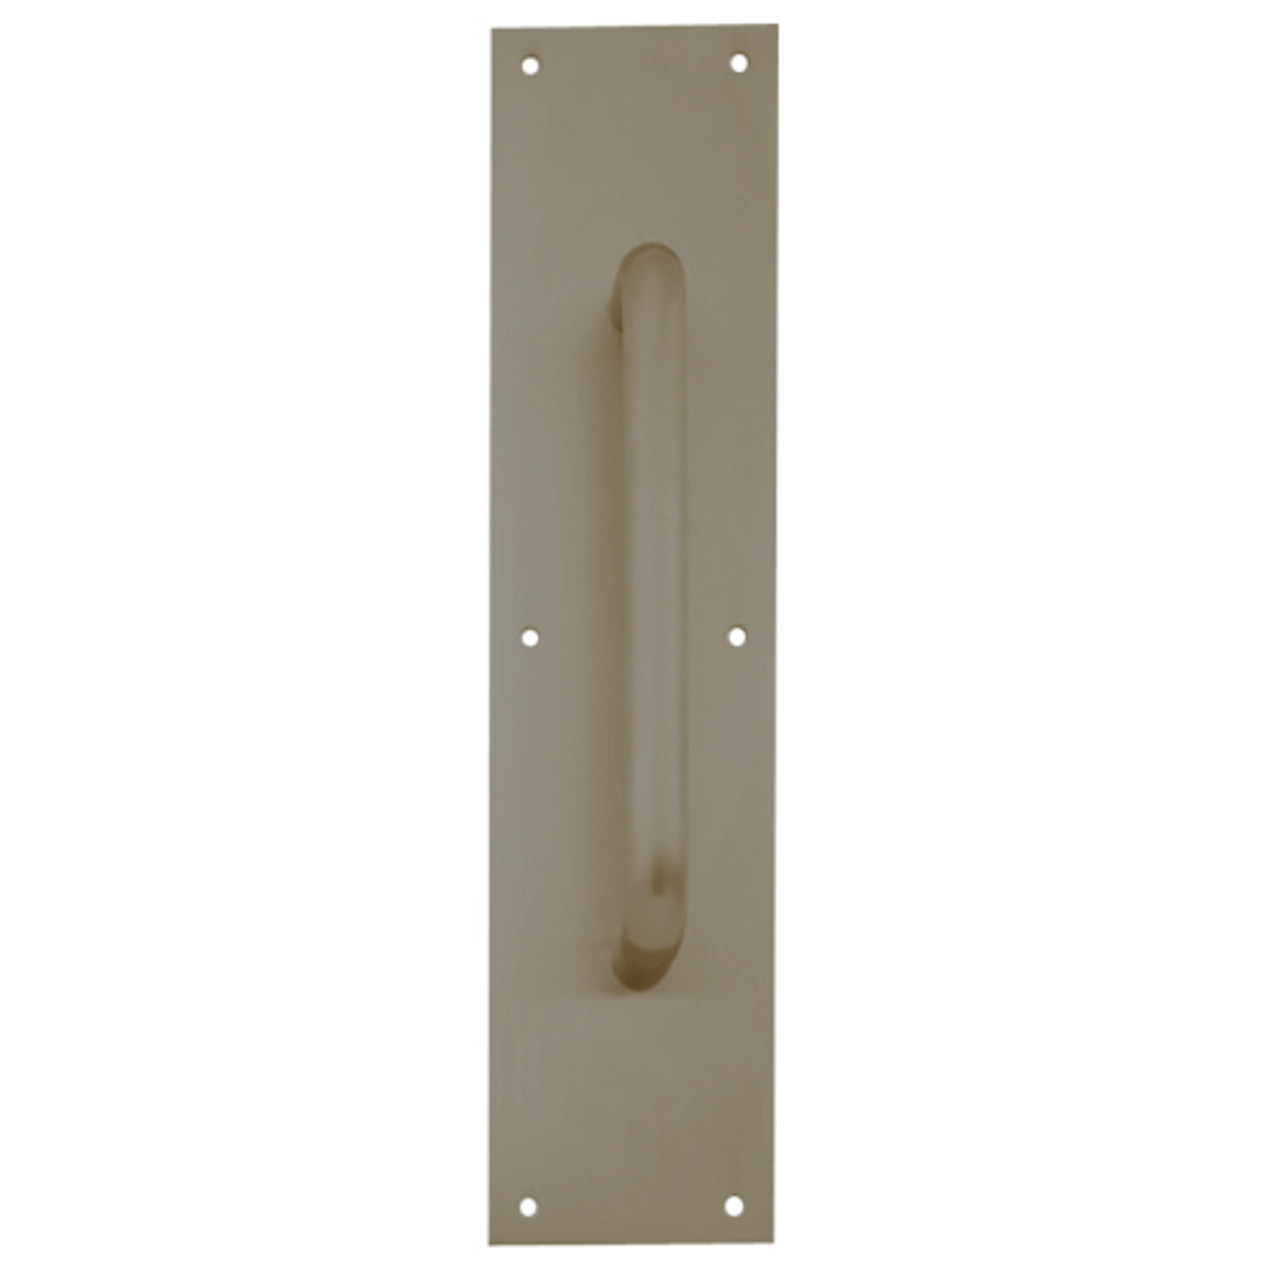 8302-6-US10B-3-5x15 IVES Architectural Door Trim 3.5x15 Inch Pull Plate in Oil Rubbed Bronze